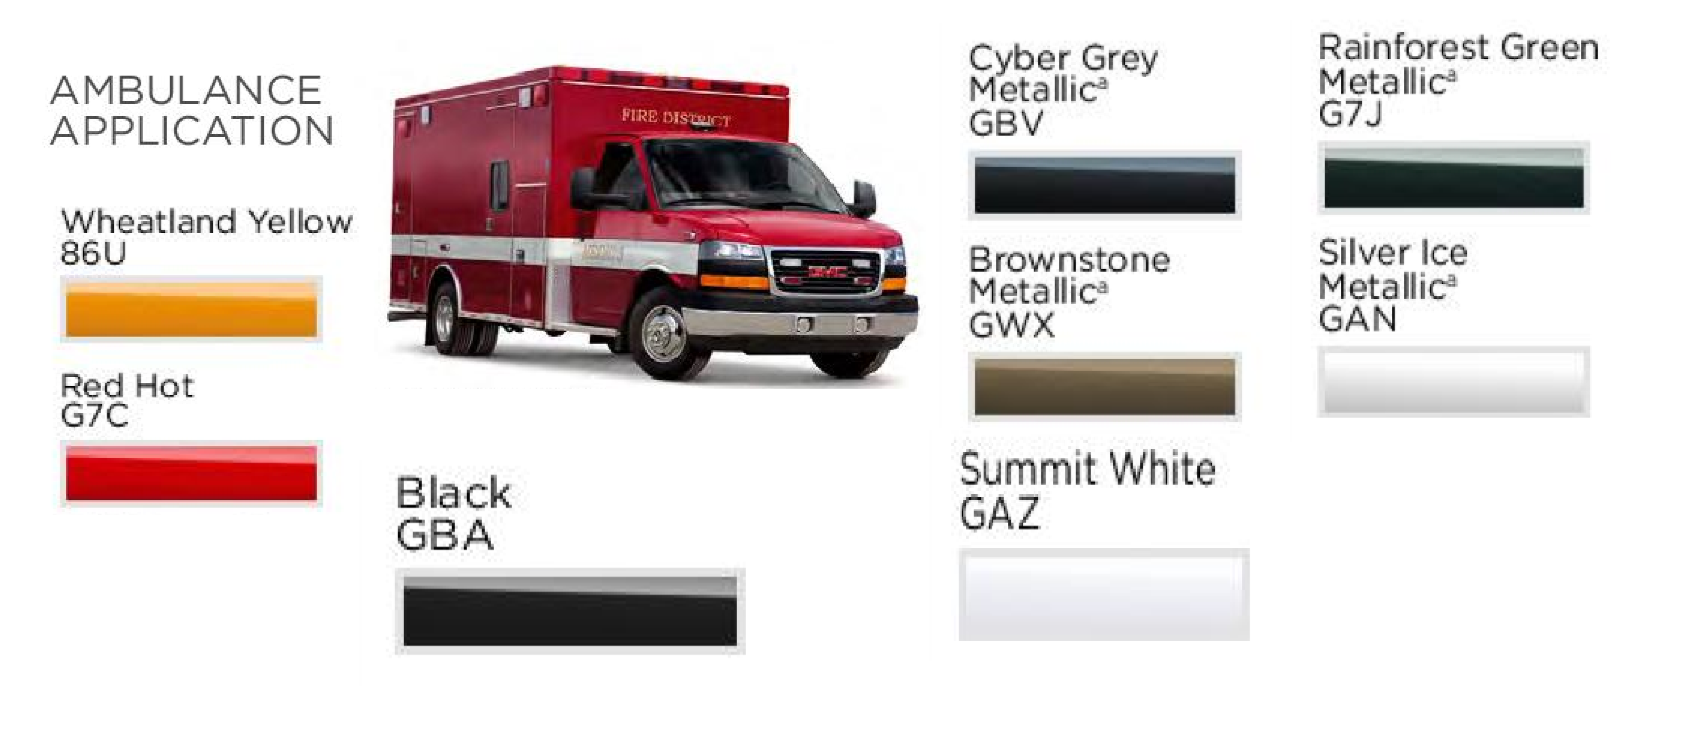 Paint Colors used on Gm Ambulances in 2017